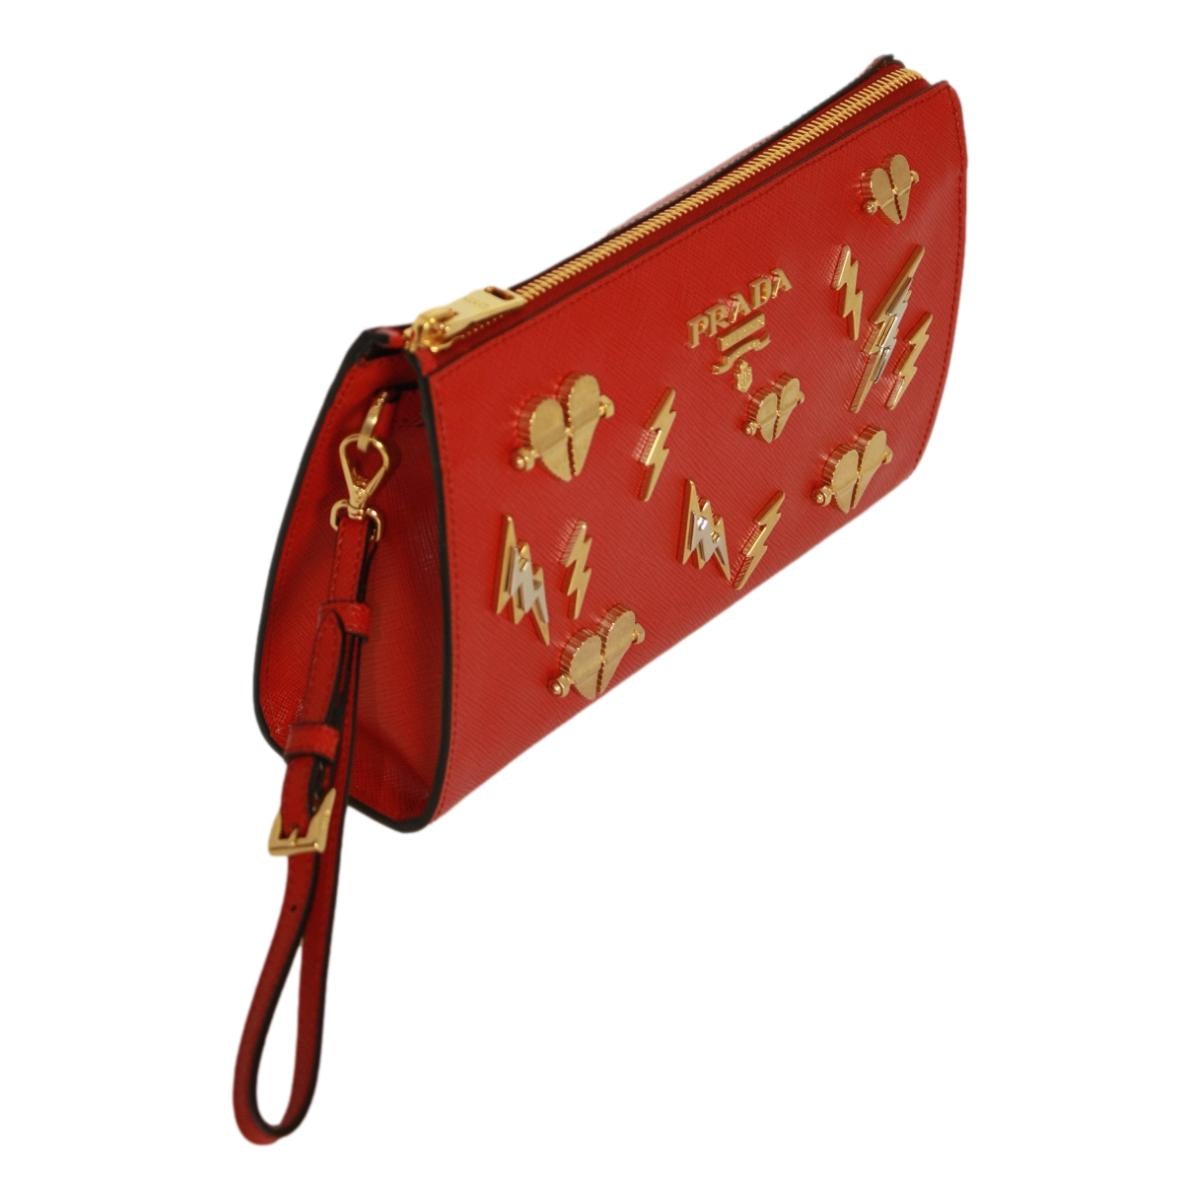 Prada Fuoco Red Saffiano Leather Gold Hearts Pouch Wristlet Bag 1NE007 at_Queen_Bee_of_Beverly_Hills